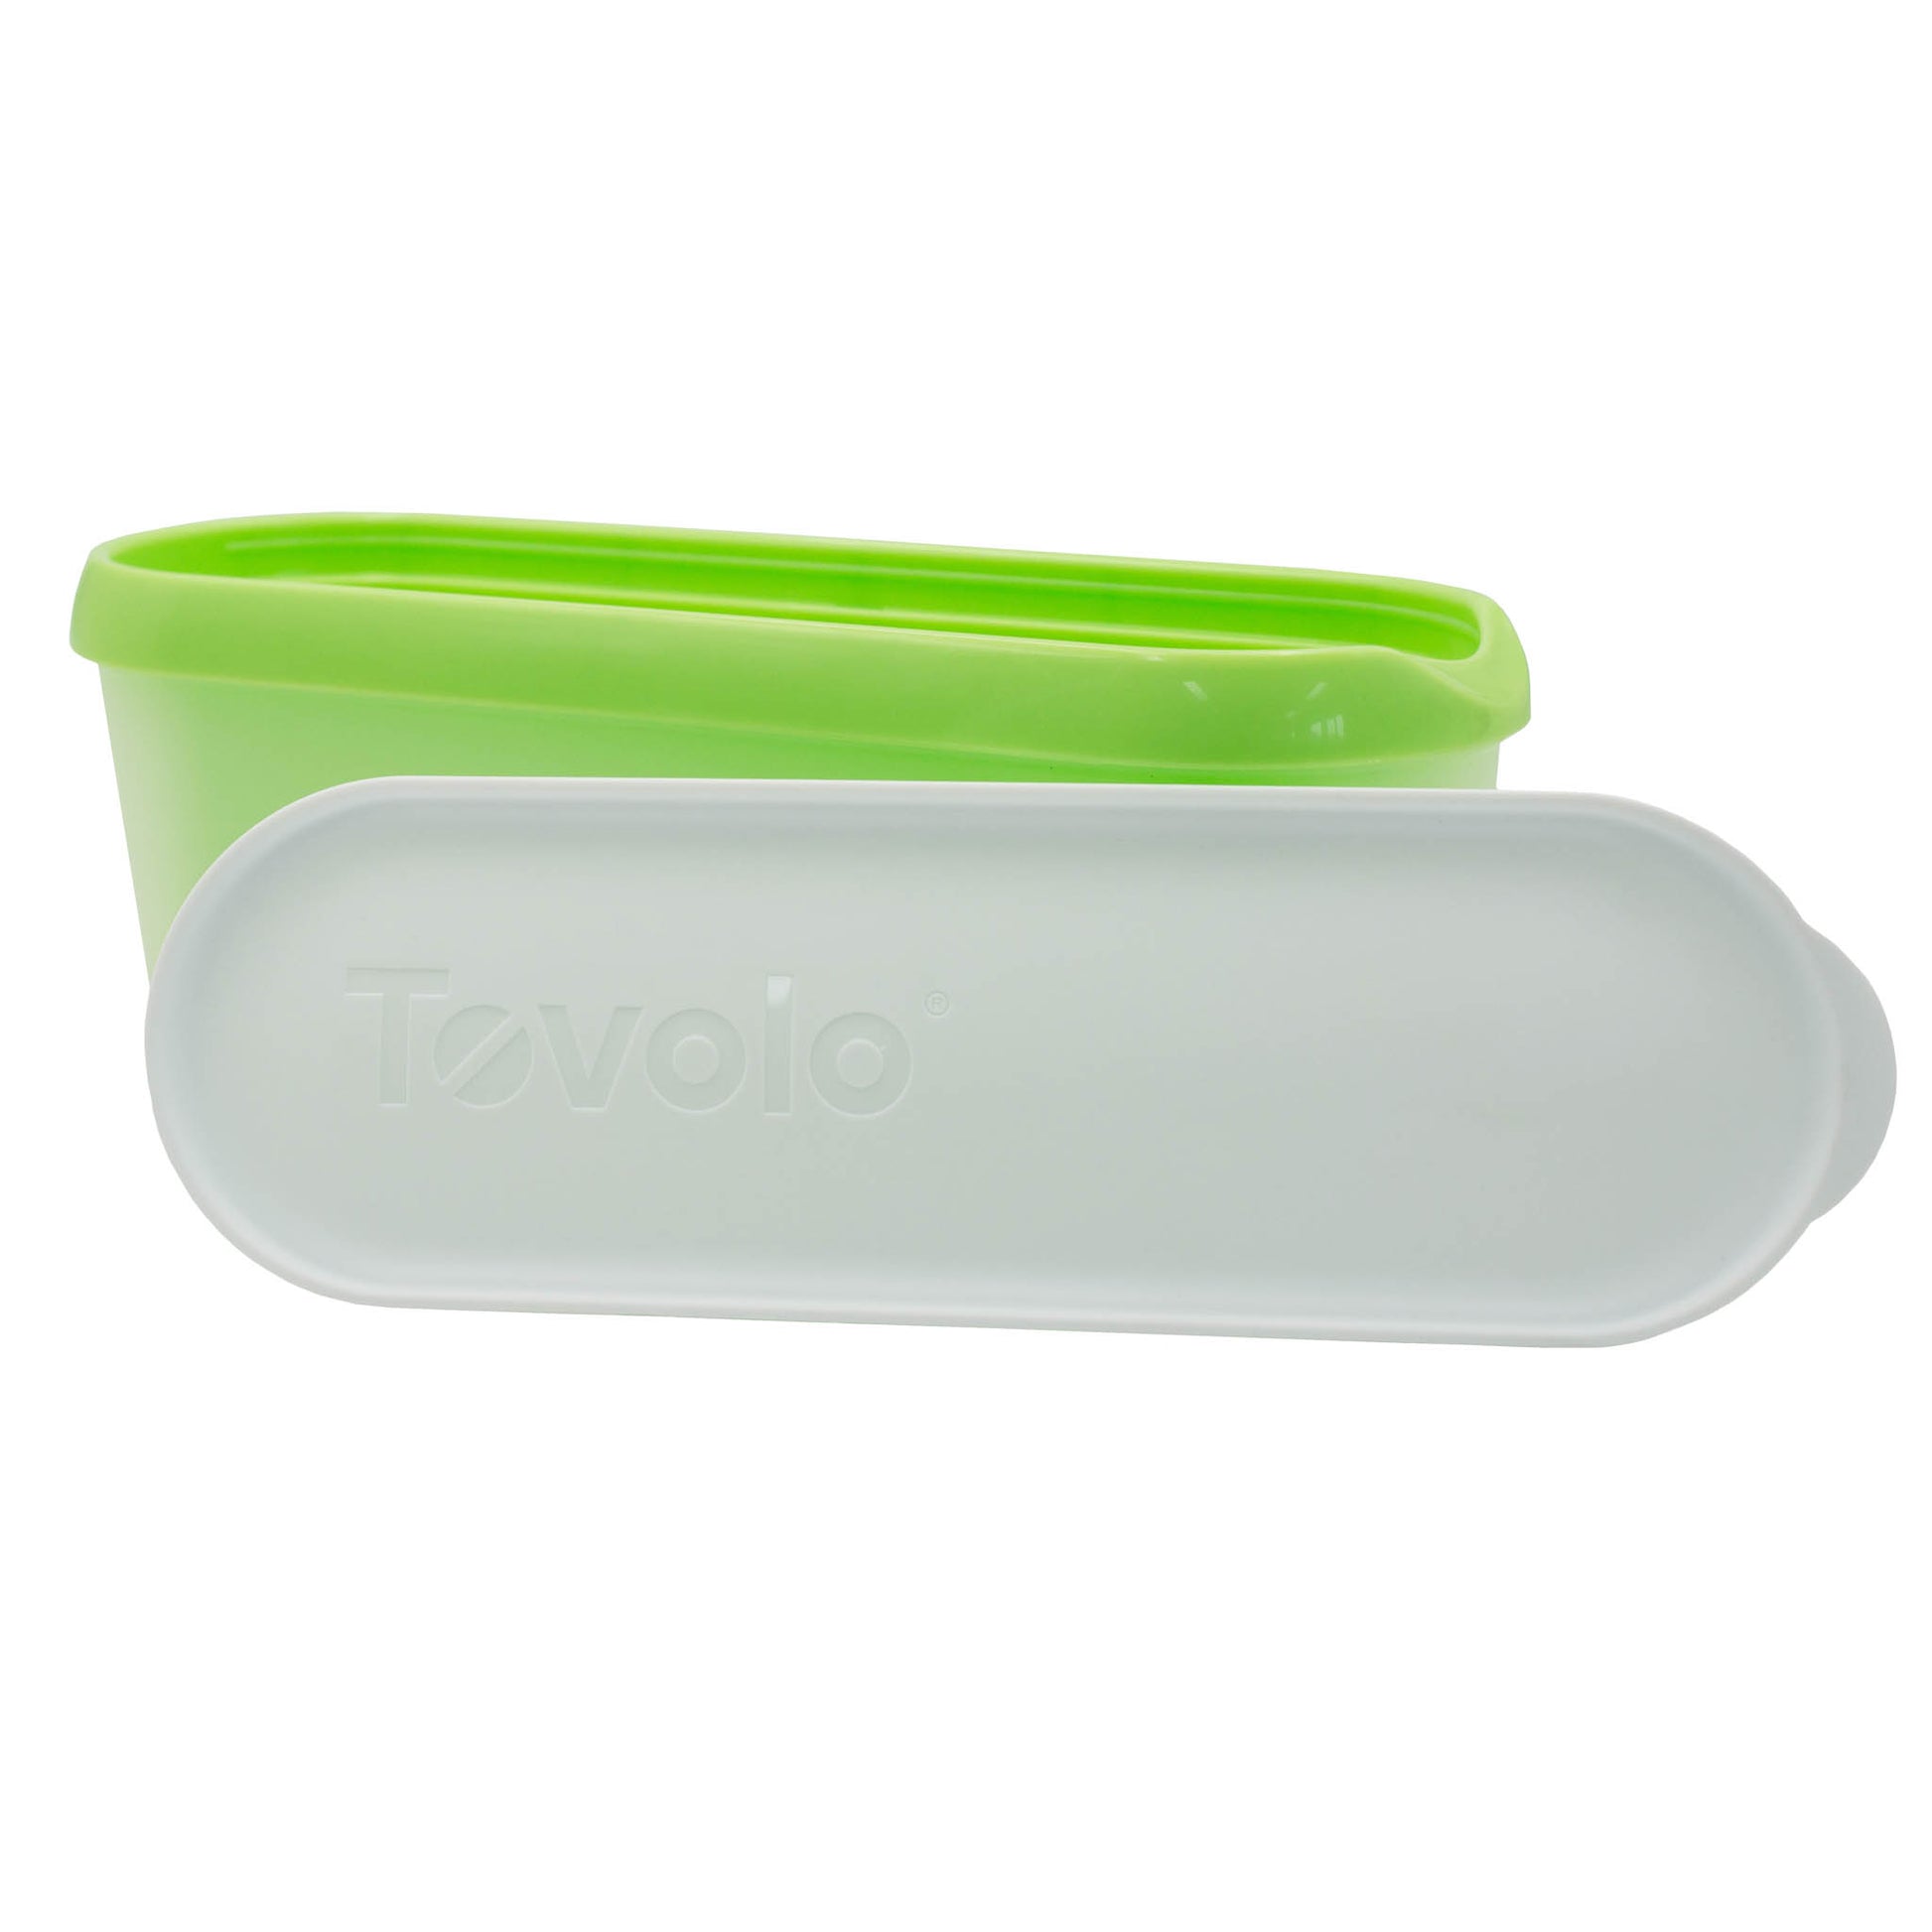 Tevolo Green food grade plastic ice cream tub for storing up to 1.4 litres of ice cream, sorbet or gelato. 